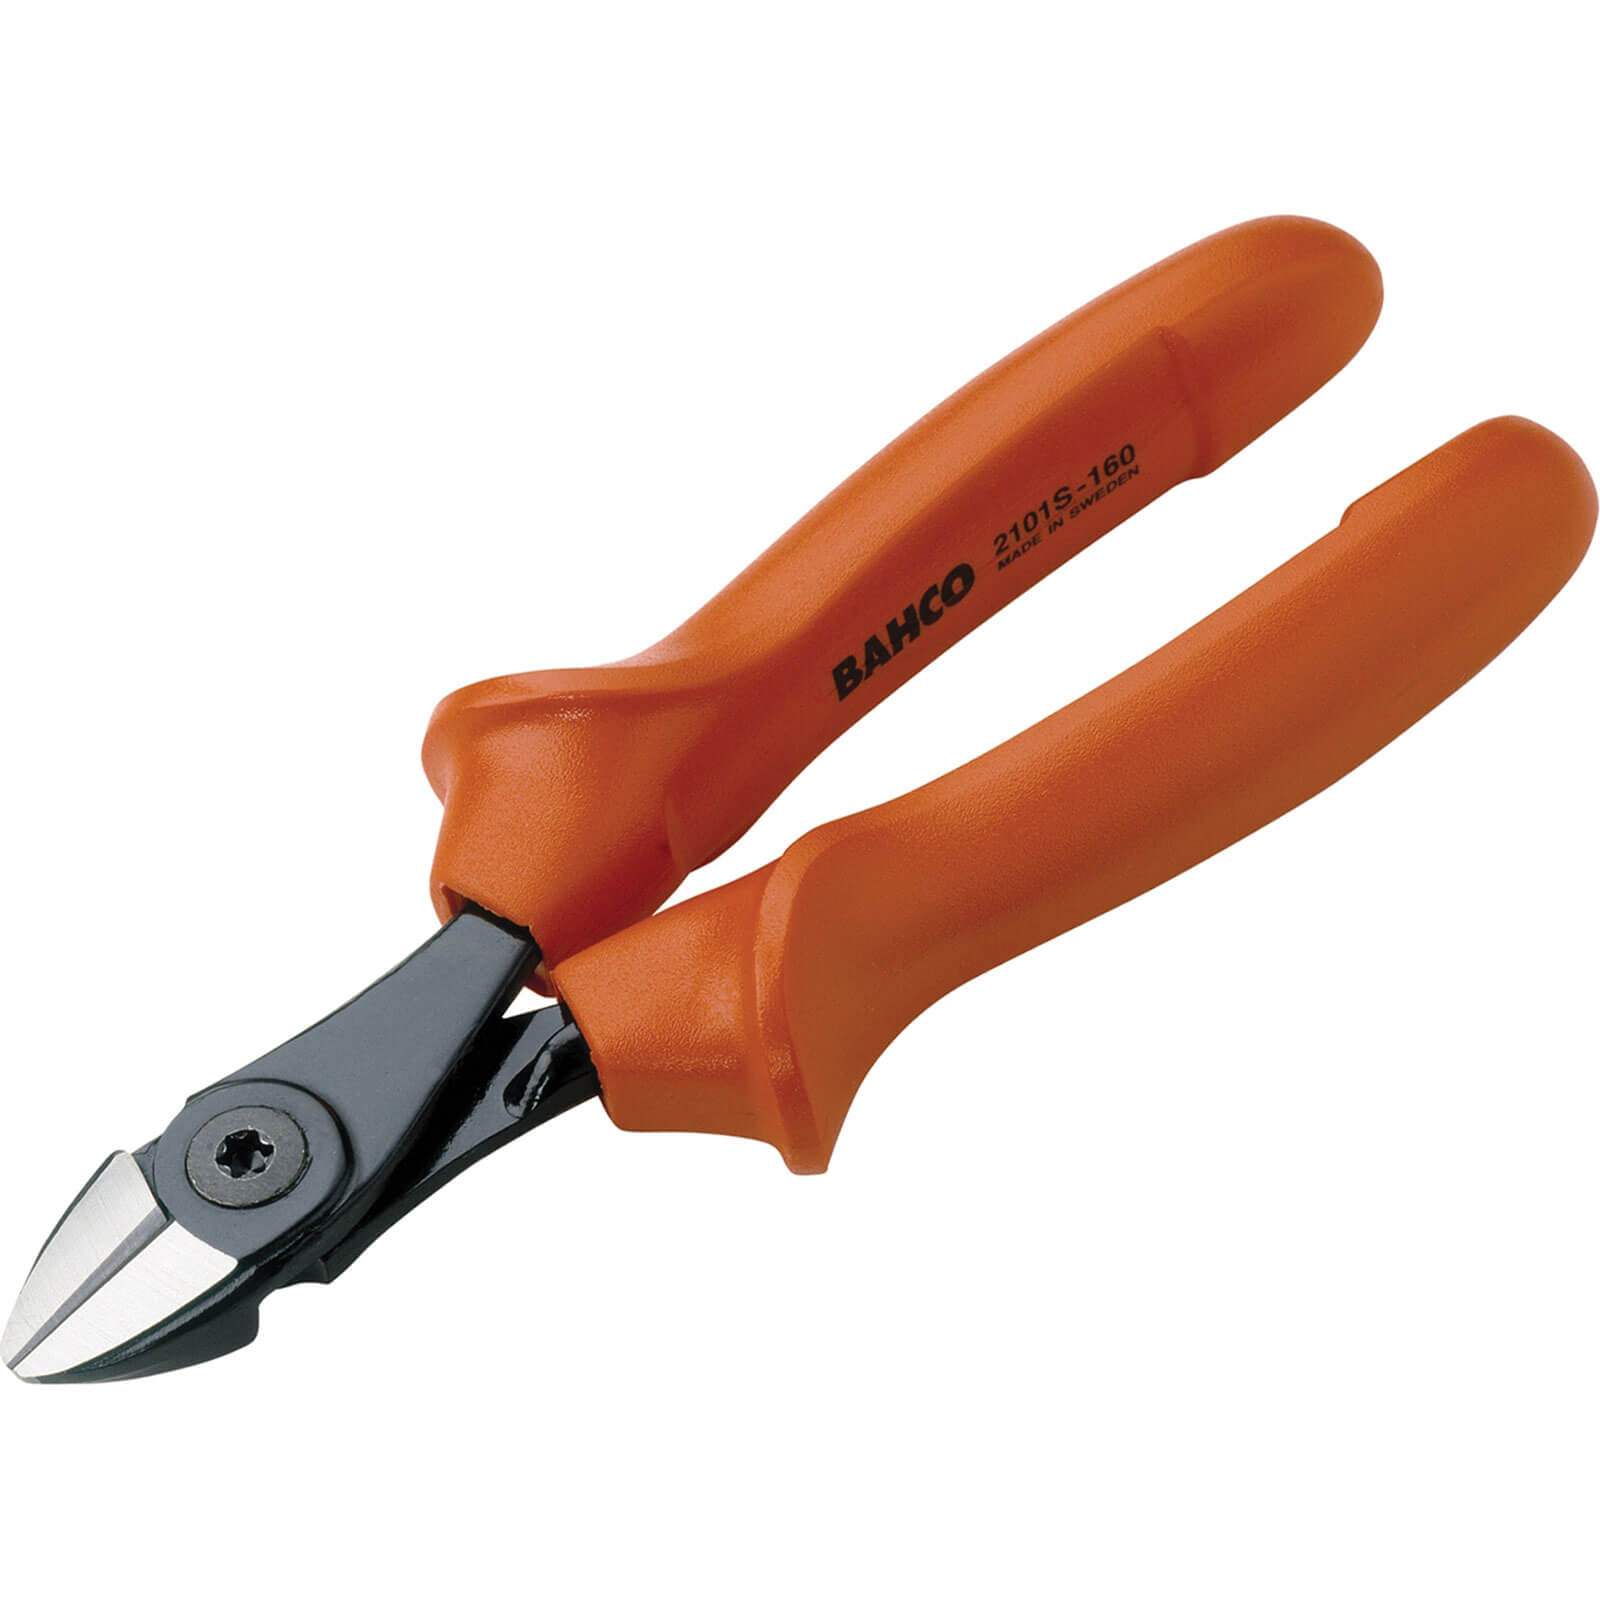 Photo of Bahco 2101s Ergo Insulated Side Cutting Pliers 140mm